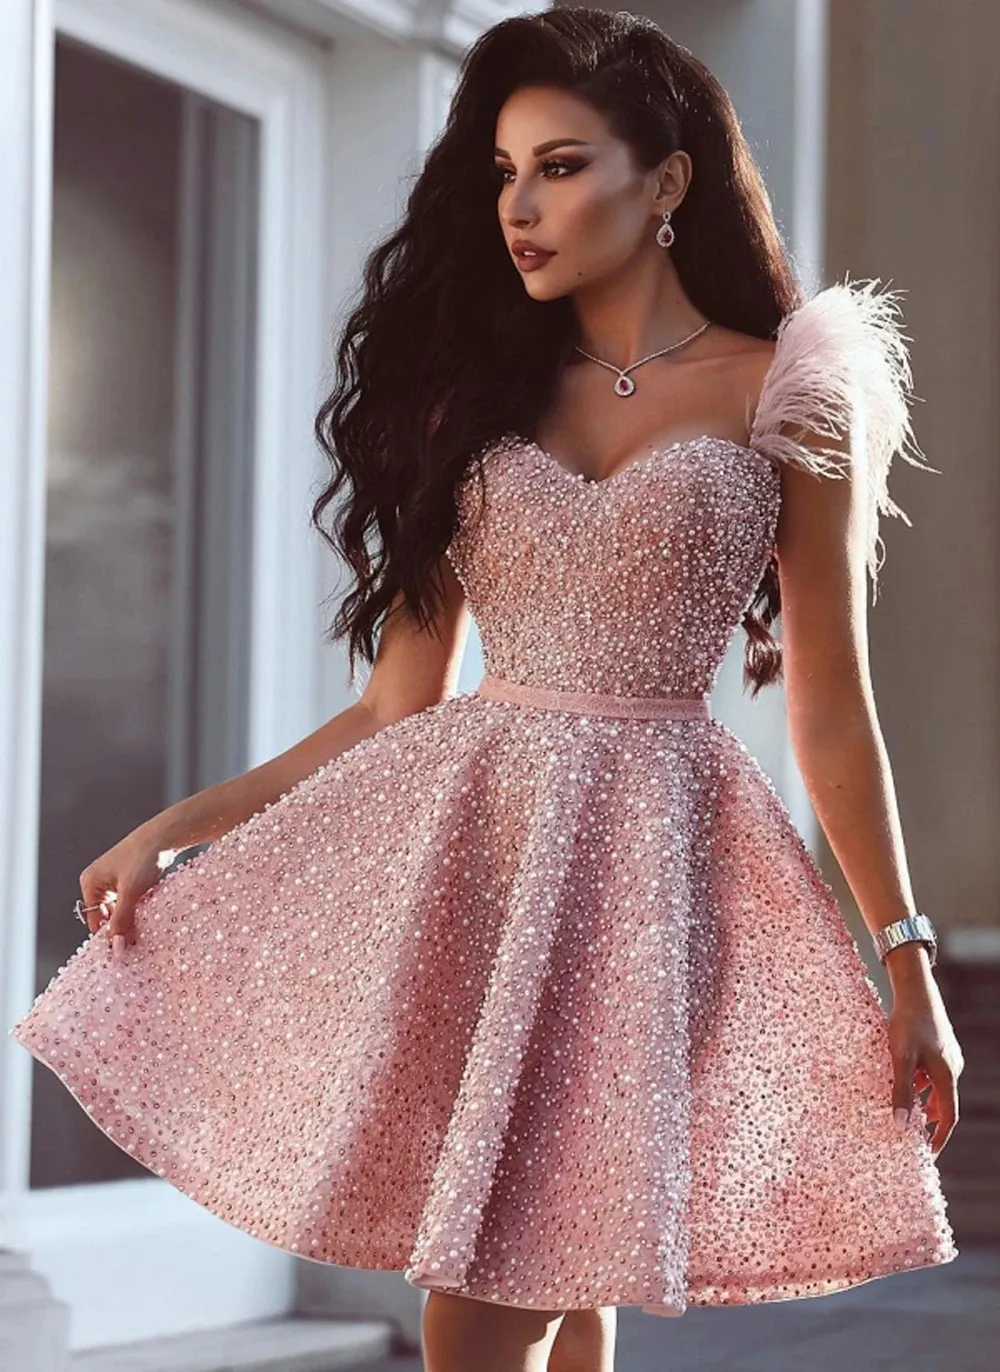 Luxury Pink Beaded Evening Dresses For Women Sweetheart With Feathers Formal Ocn Cocktail Wedding Prom Party Gowns 240125